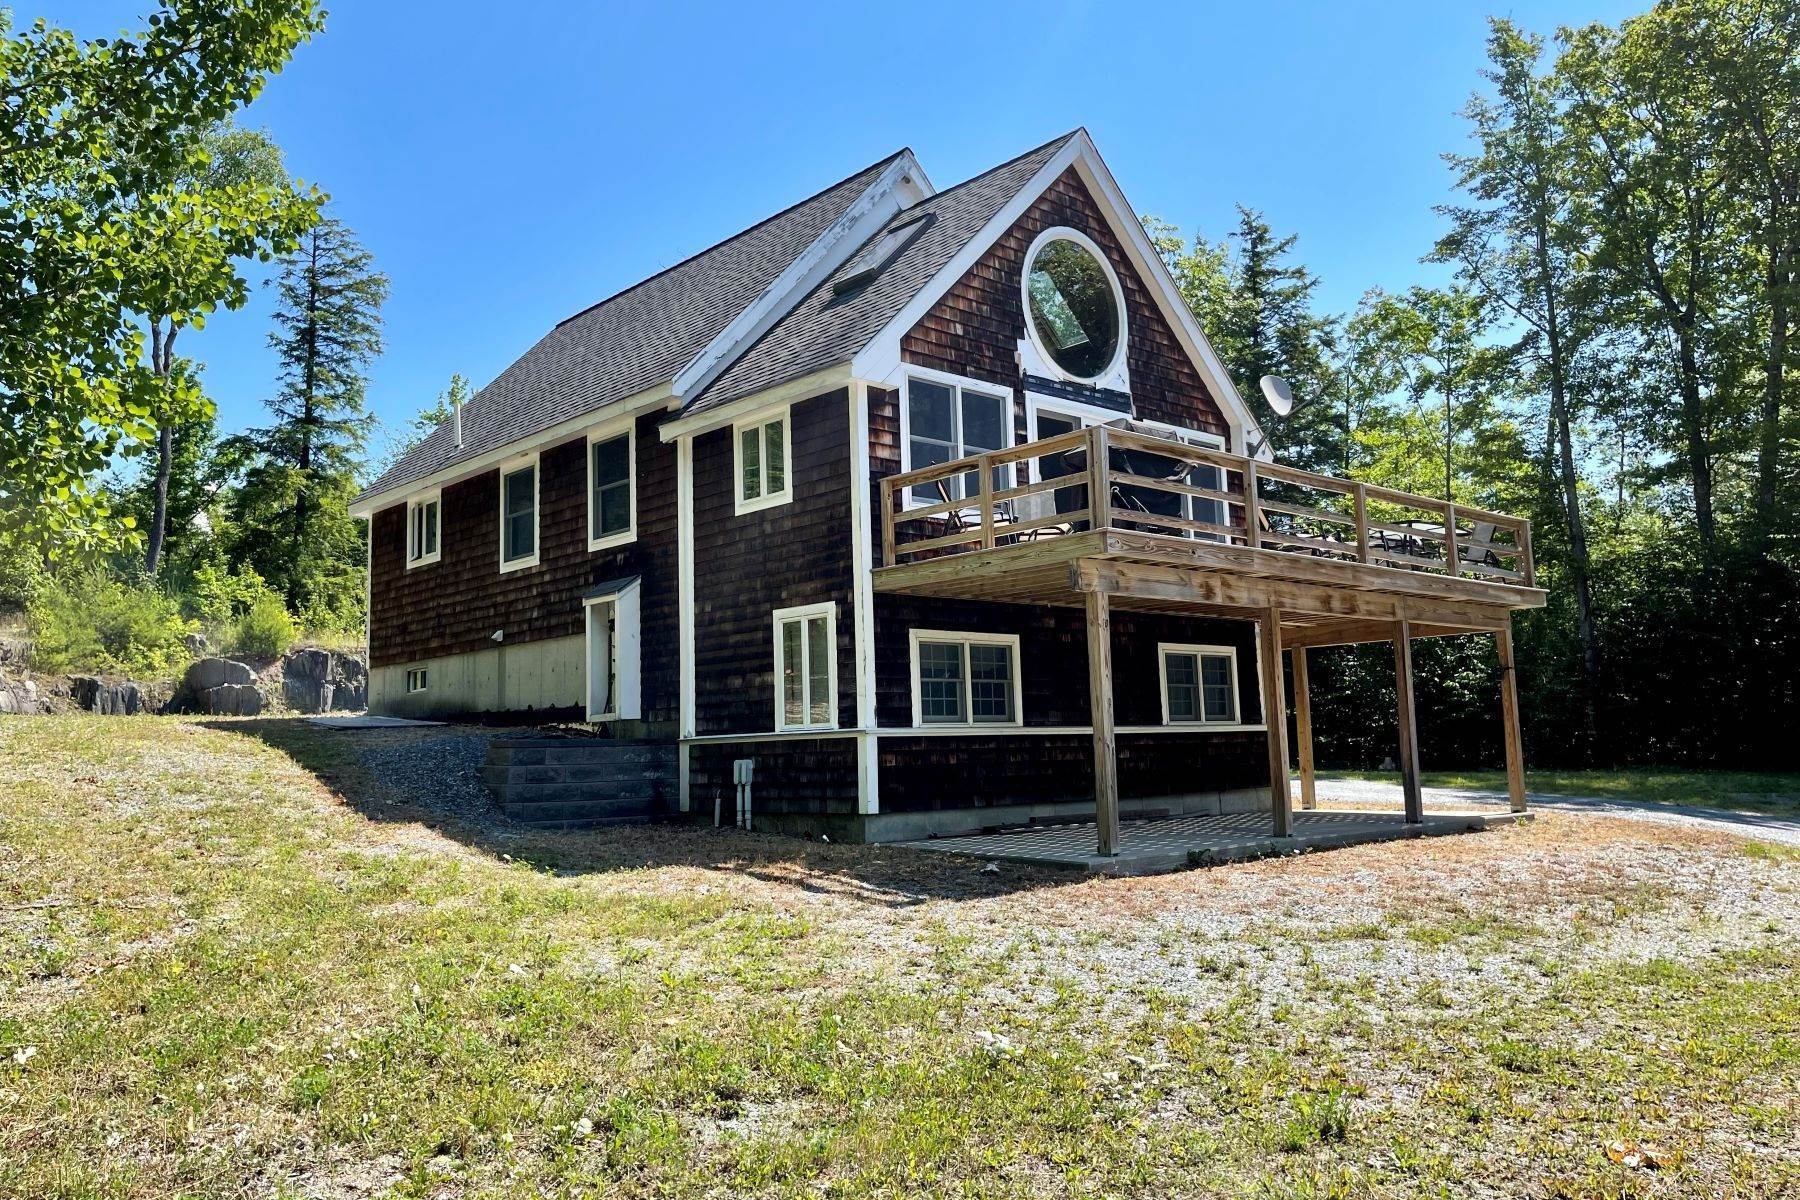 Single Family Homes for Sale at Well-Built Camp Ready for Finishing Touches 1300 Tenney Pond Road, Newbury, VT 05051